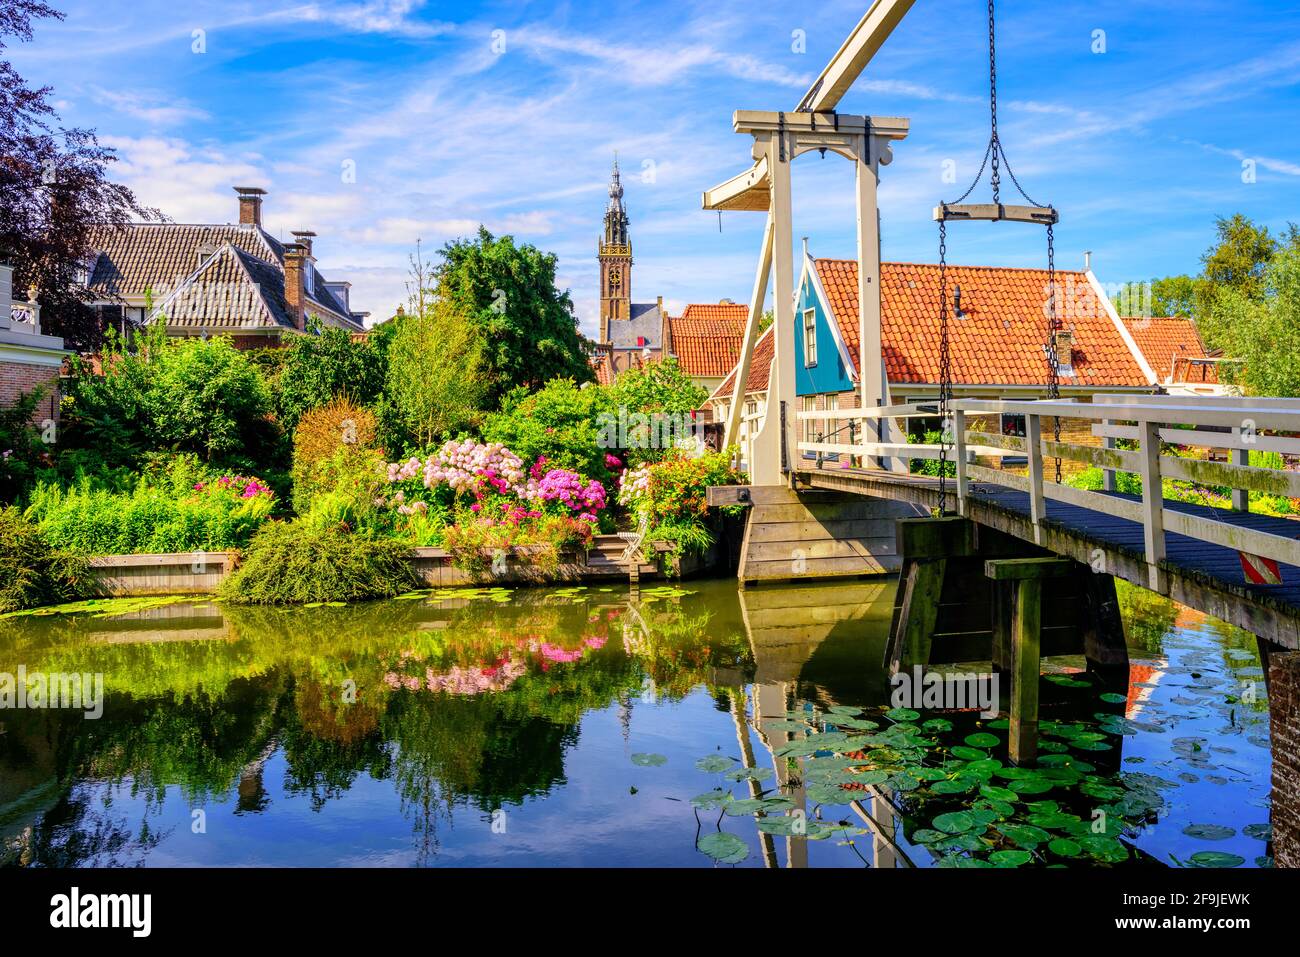 Edam town in North Holland, Netherlands, view of the historical wooden Kwakelbrug bridge and traditional houses in the Old town center Stock Photo